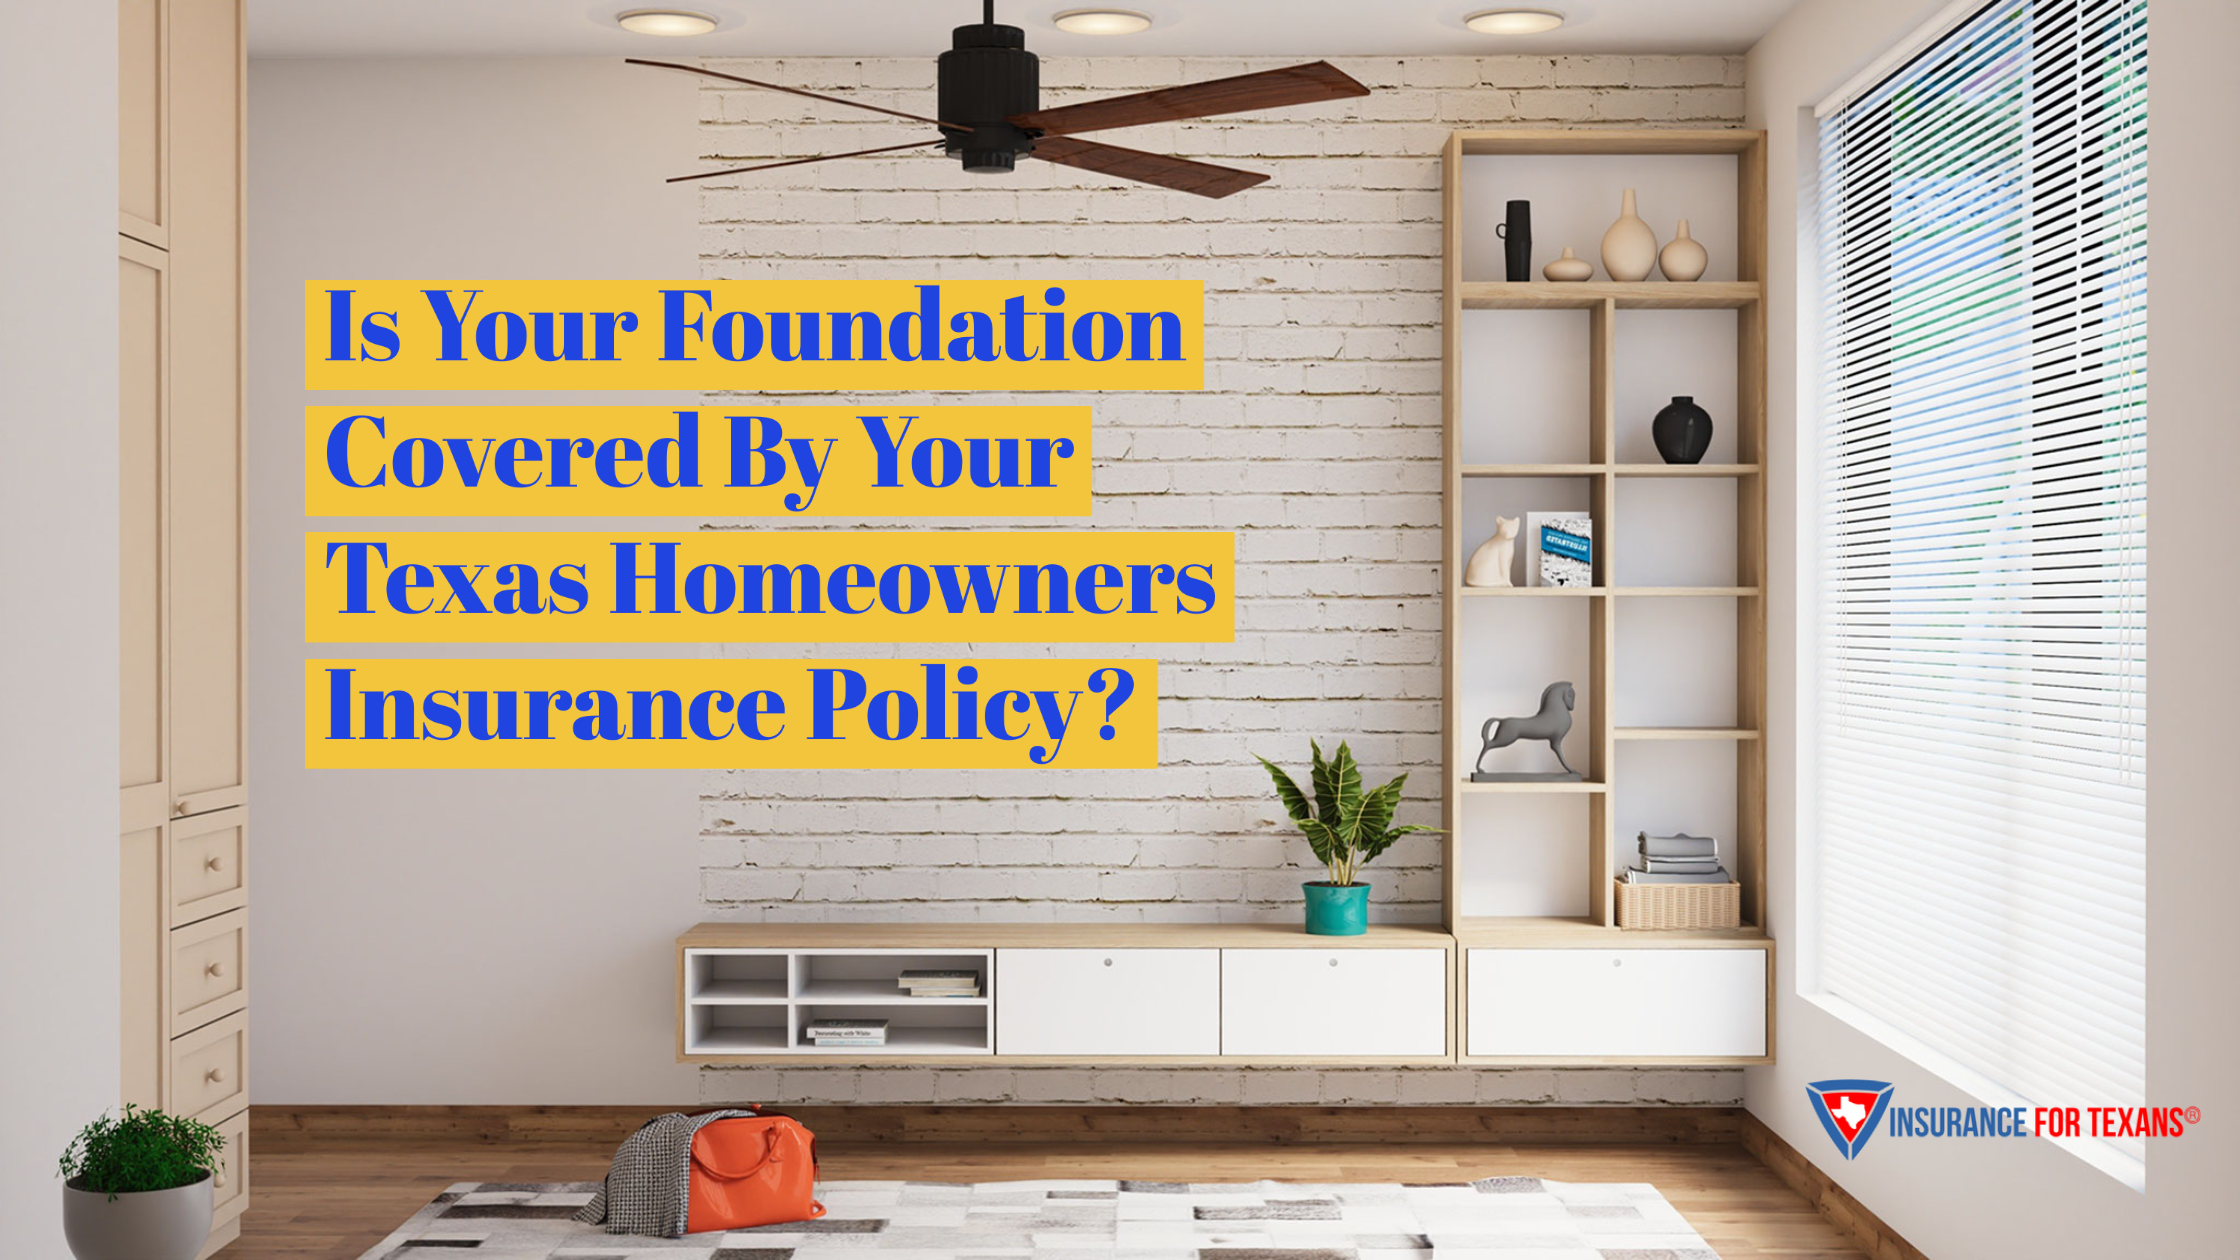 Is Your Foundation Covered By Your Texas Homeowners Insurance Policy?